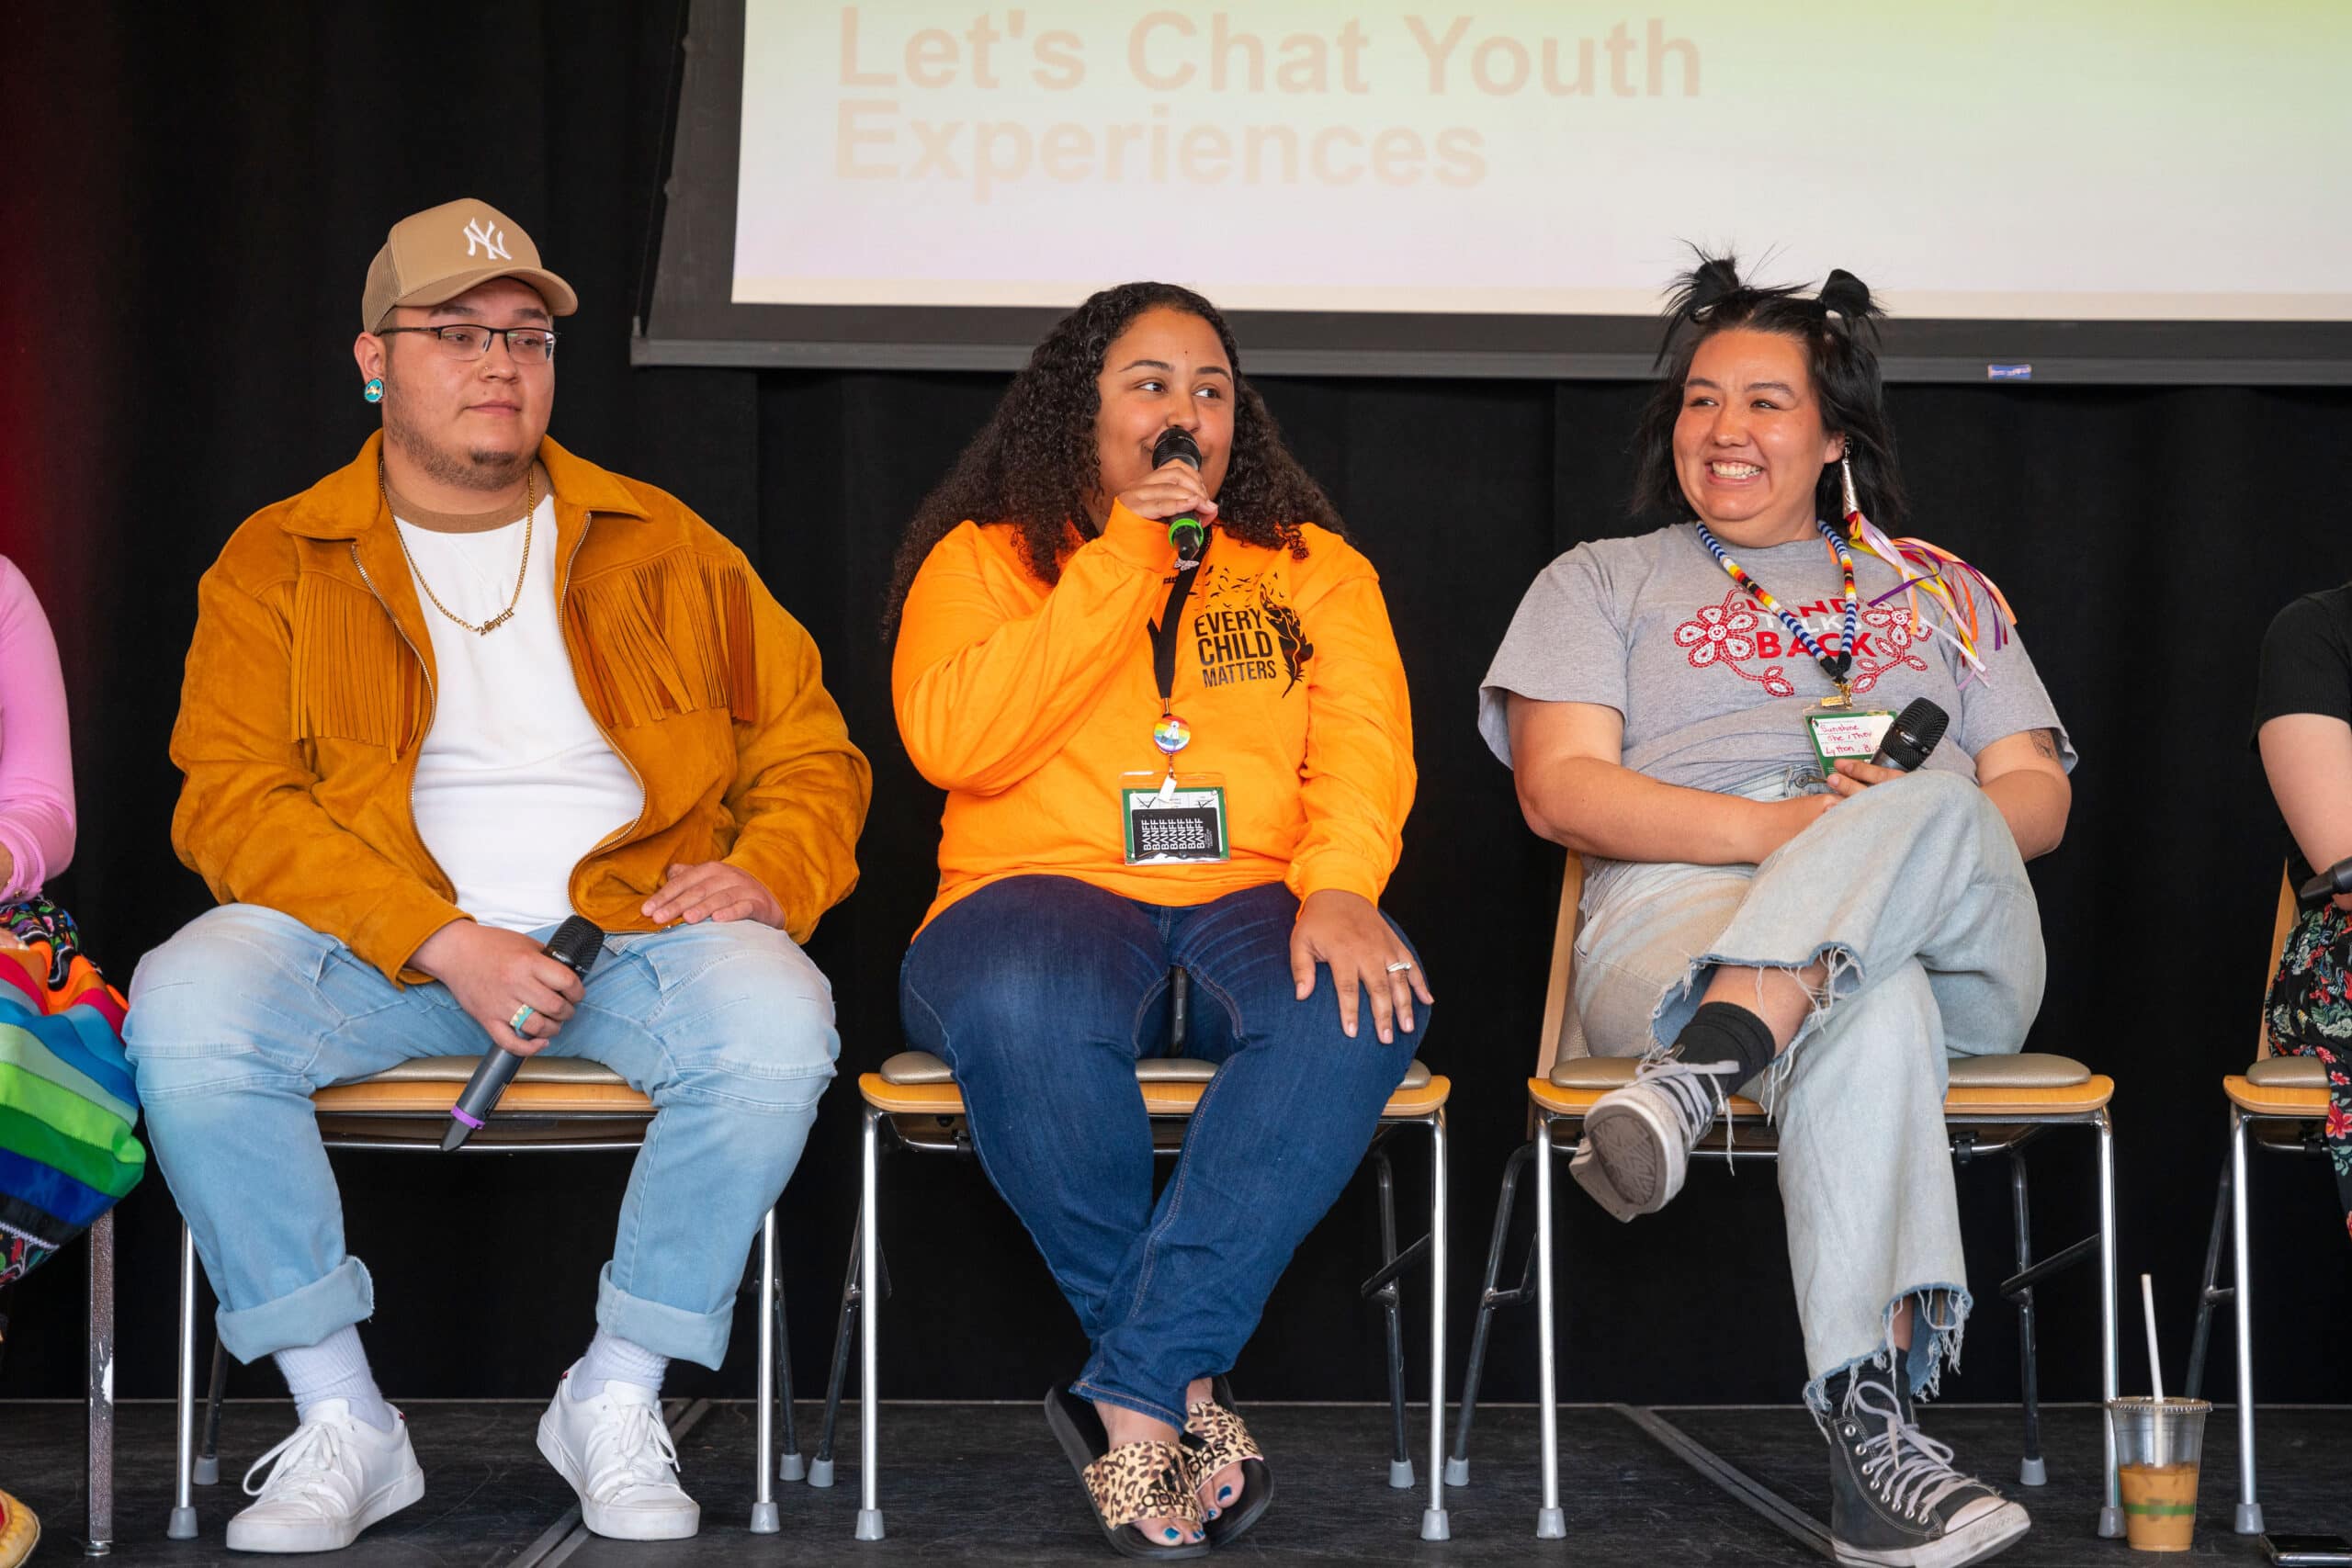 Three Indigenous youth sit on a stage giving a presentation. One is male and wears a hide jacket, one is Afro-Indigenous and wears an orange 'Every Child Matters' shirt, and one wears a grey shirt